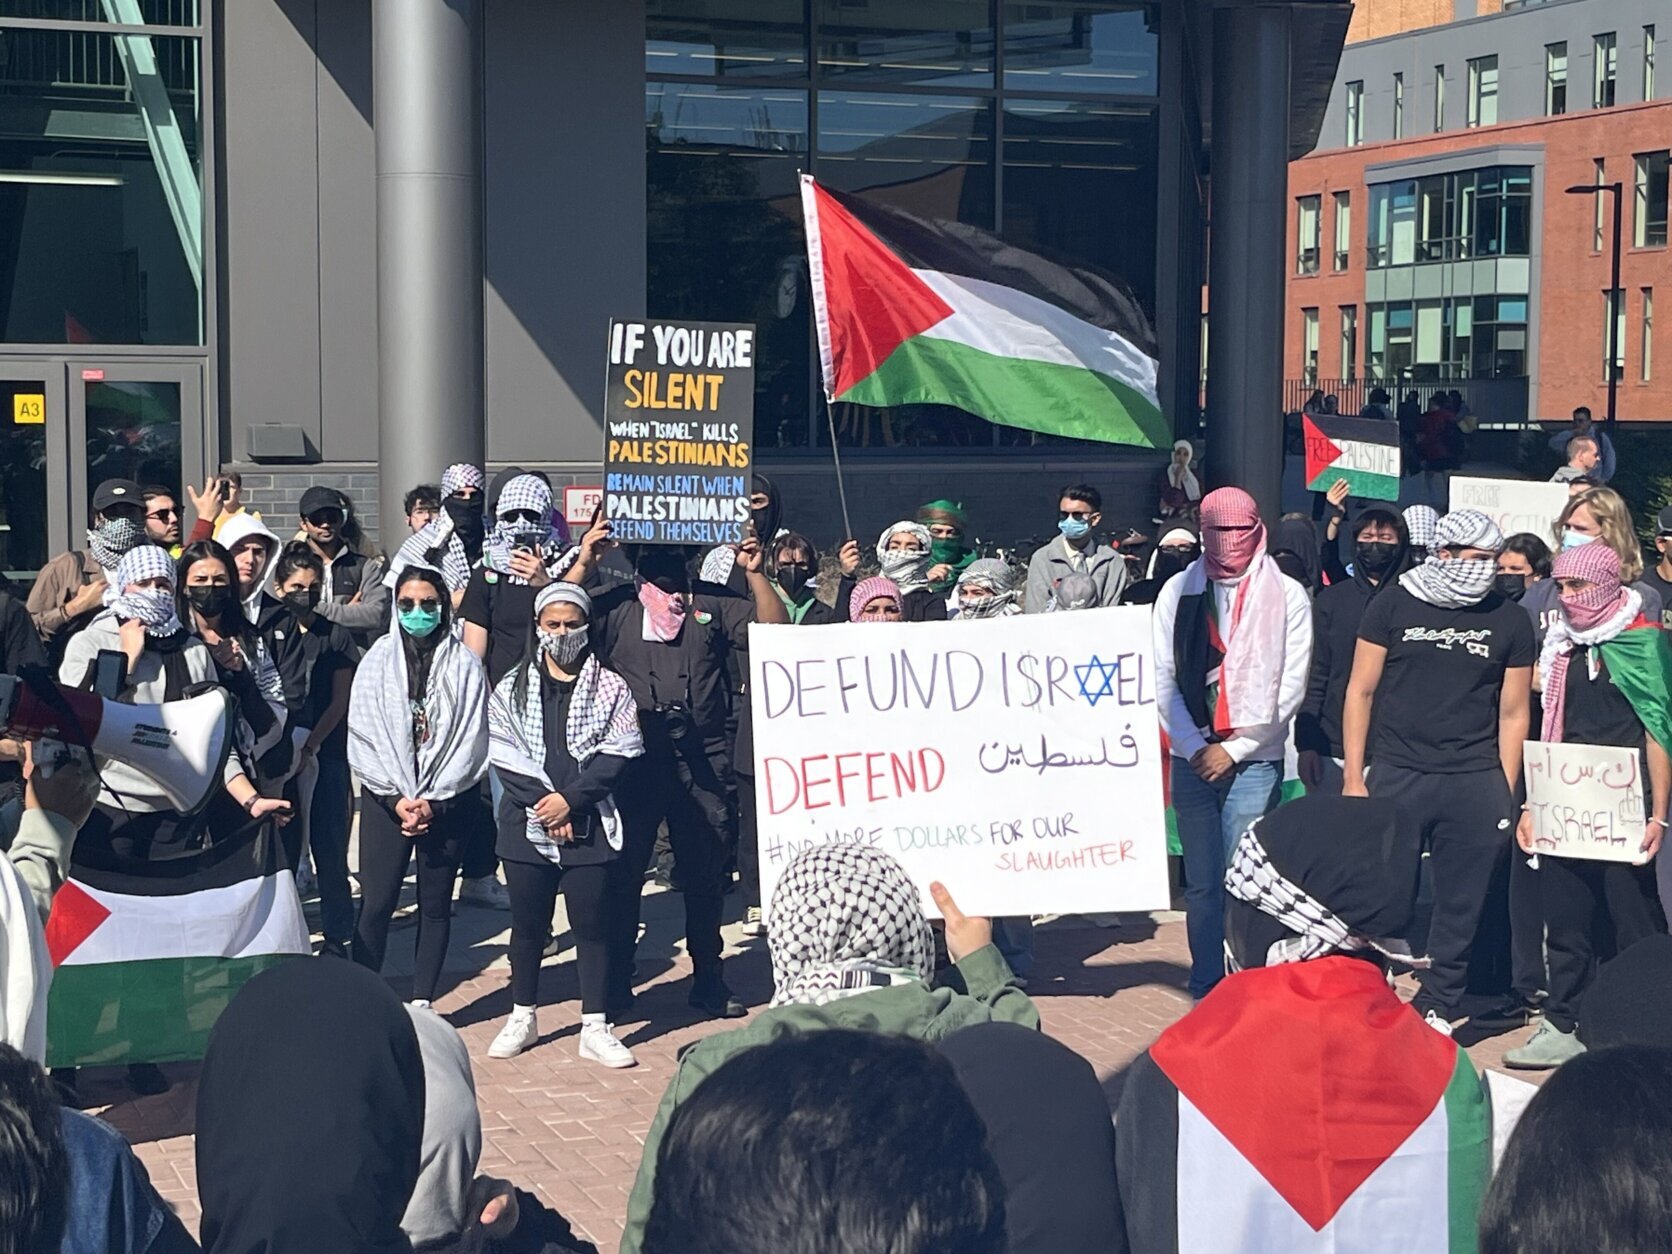 A crowd of students with signs and a Palestinian flag.